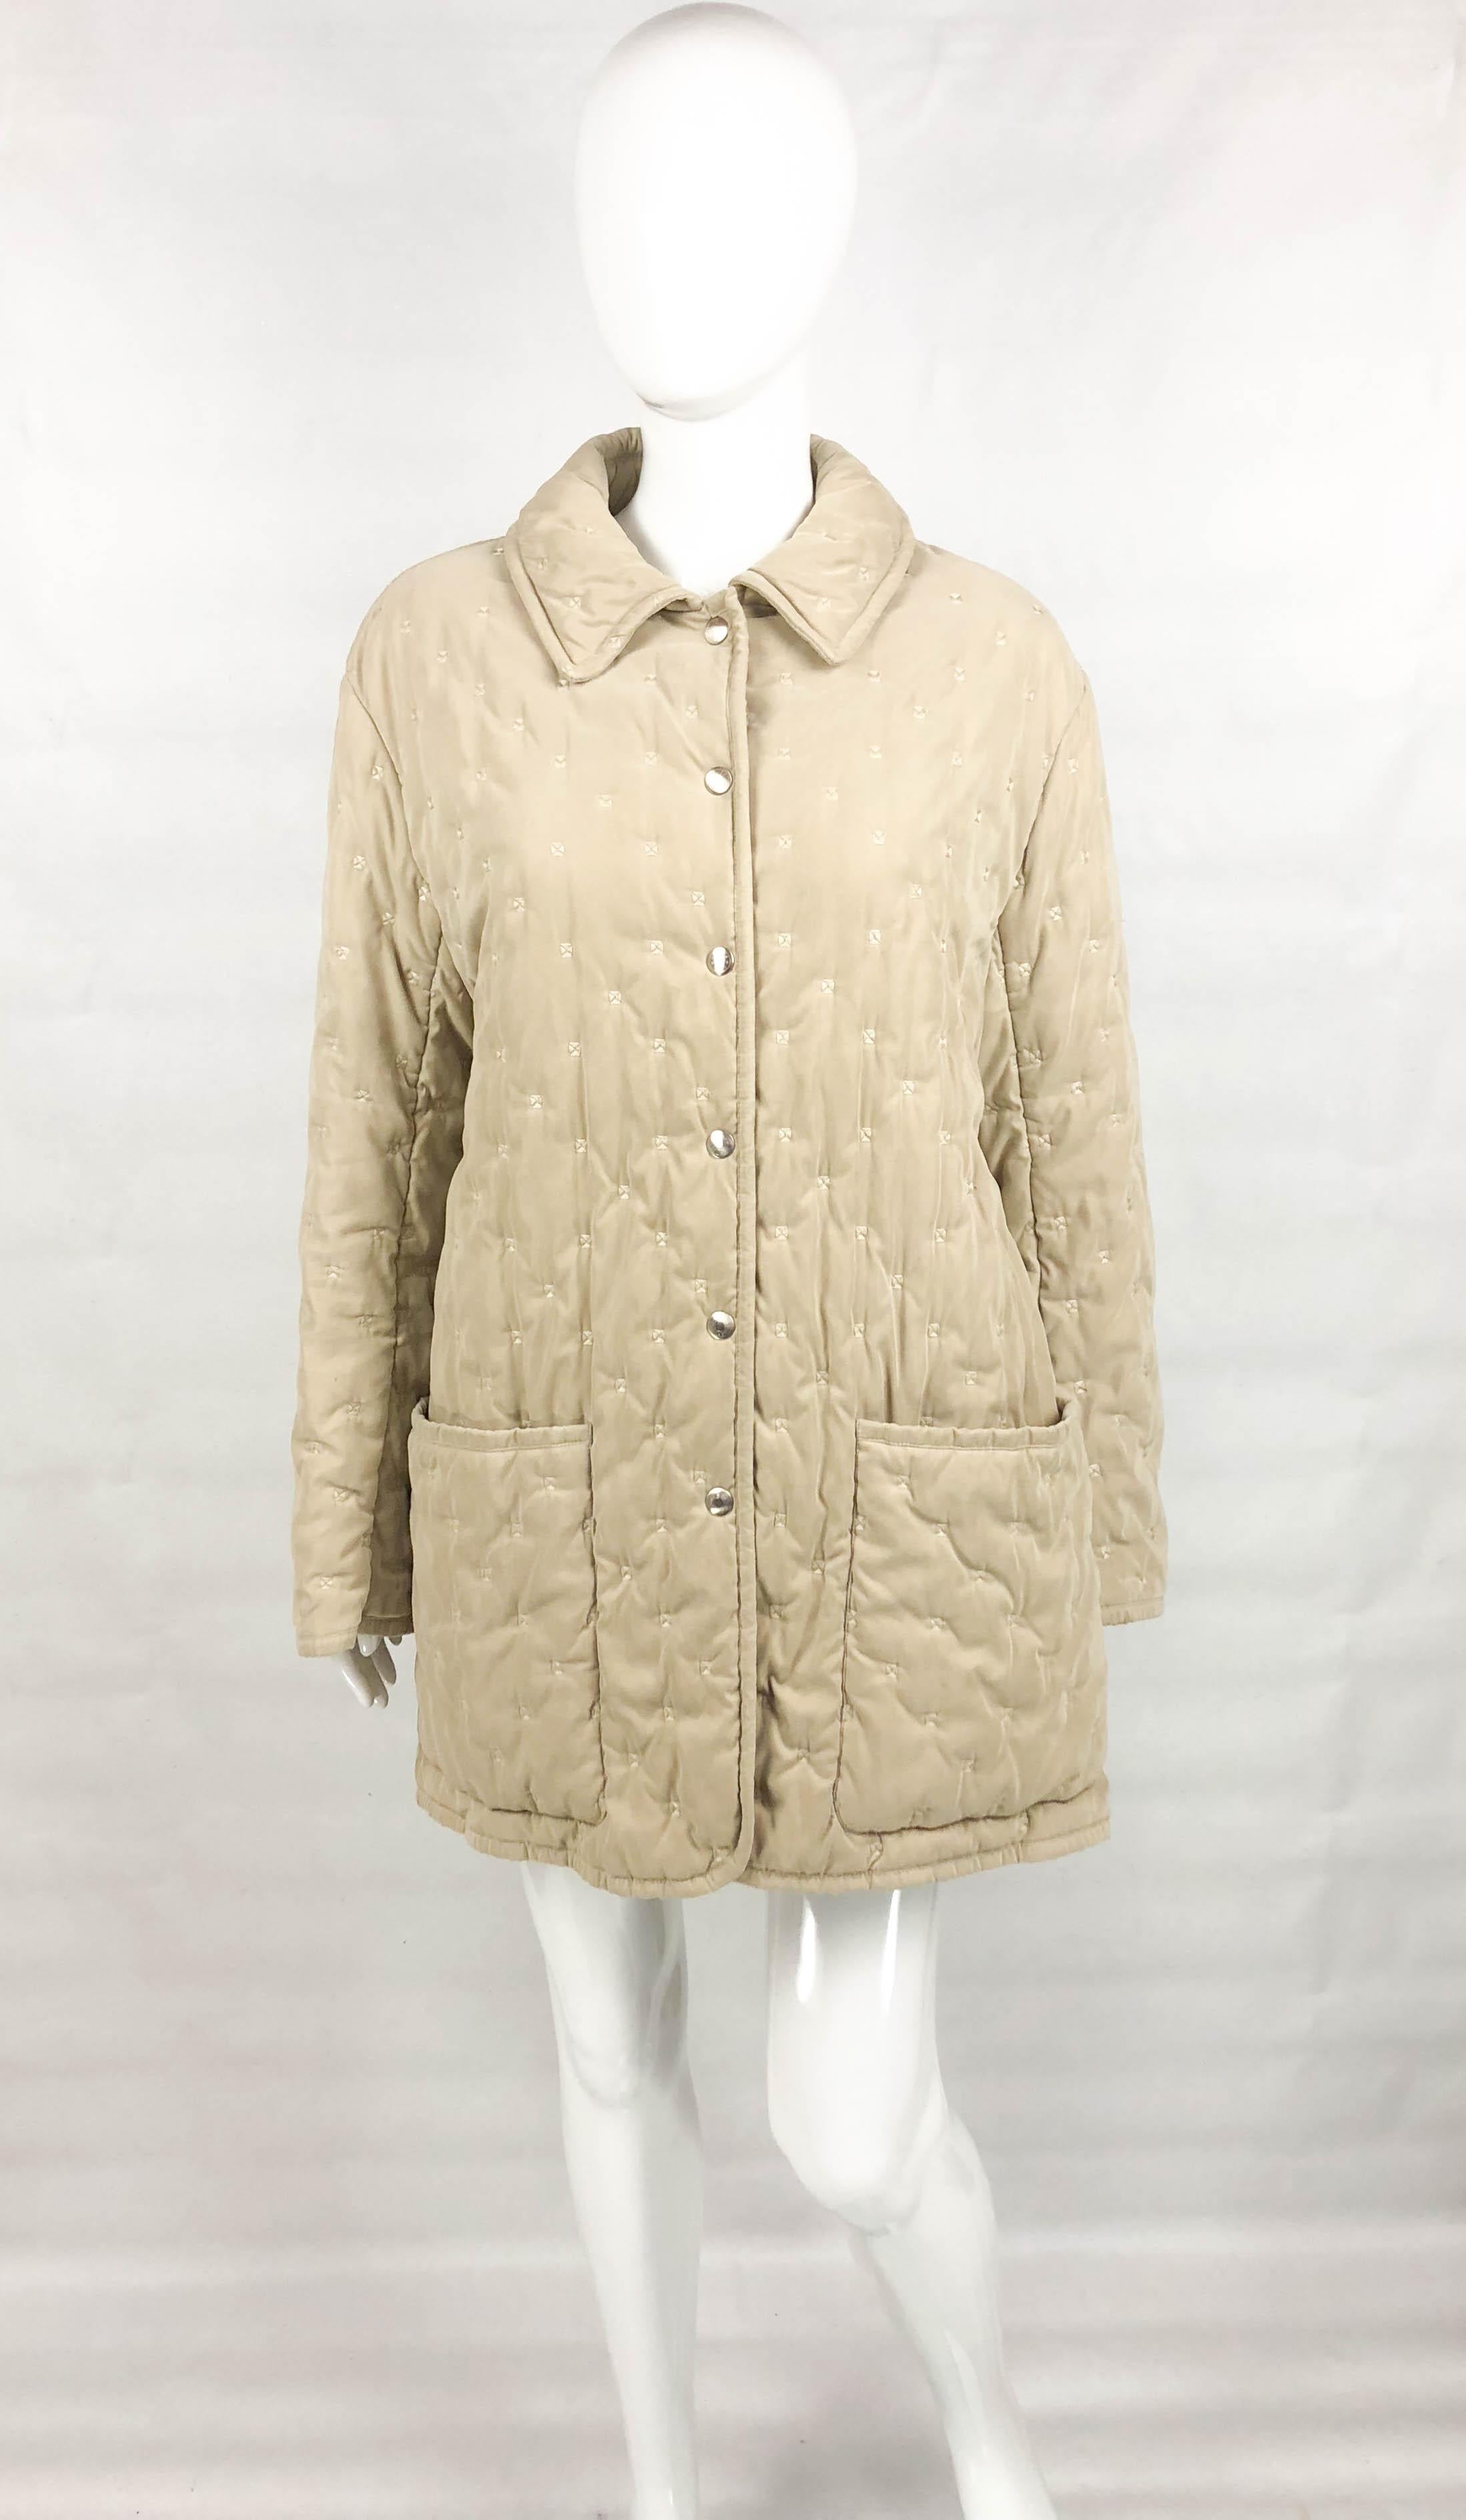 Vintage Hermes Taupe Quilted Jacket. This stylish quilted jacket by Hermes dates back from the 1990’s. Straight cut with stitched square detail, it has two large pockets on the front. There are 6 silver-tone pressure buttons down the front saying